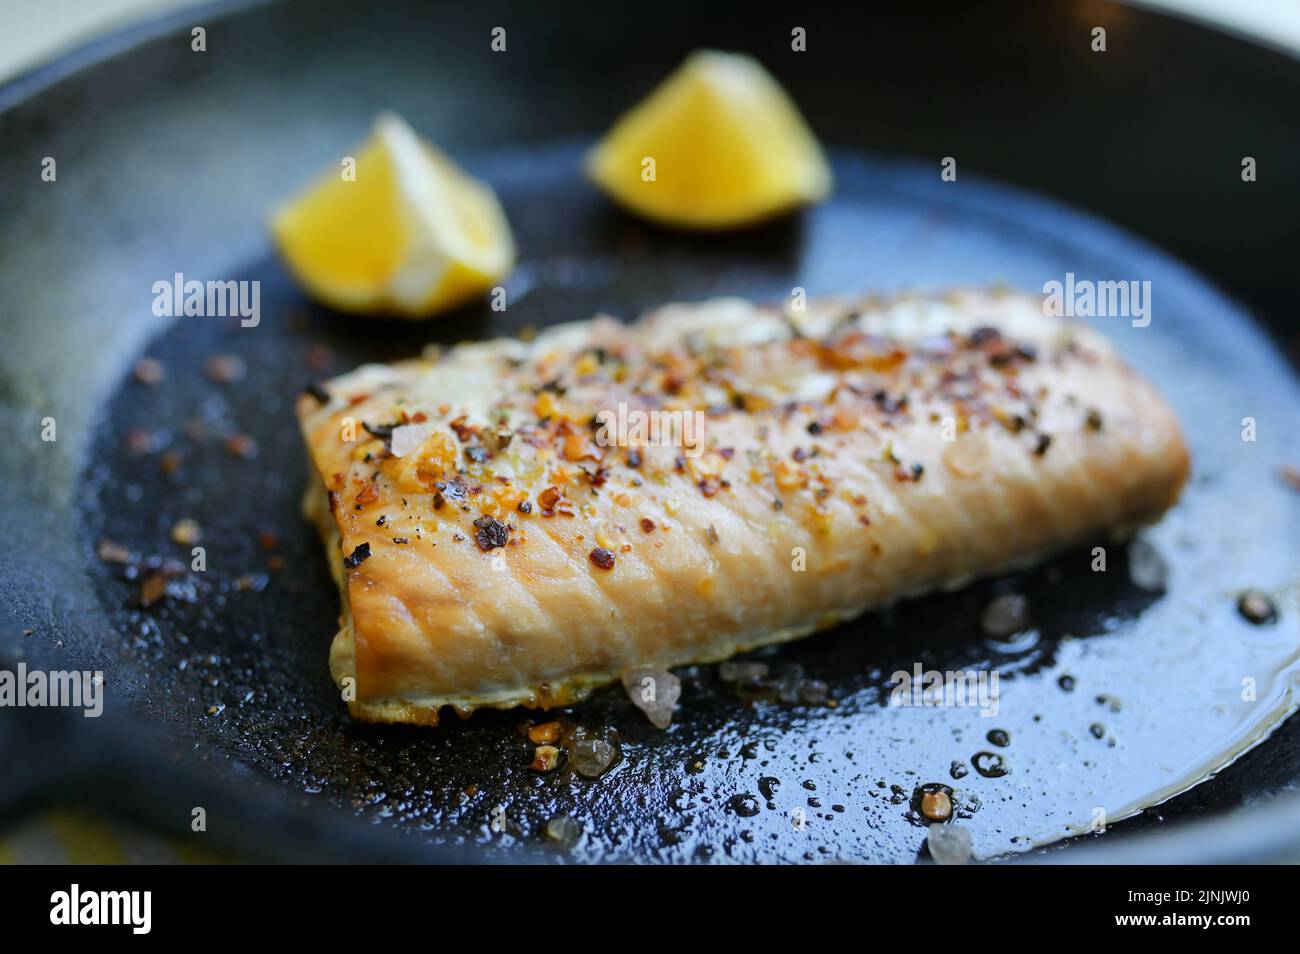 Roasted Salmon Fillet Steak In A Pan With Lemon Slices Stock Photo